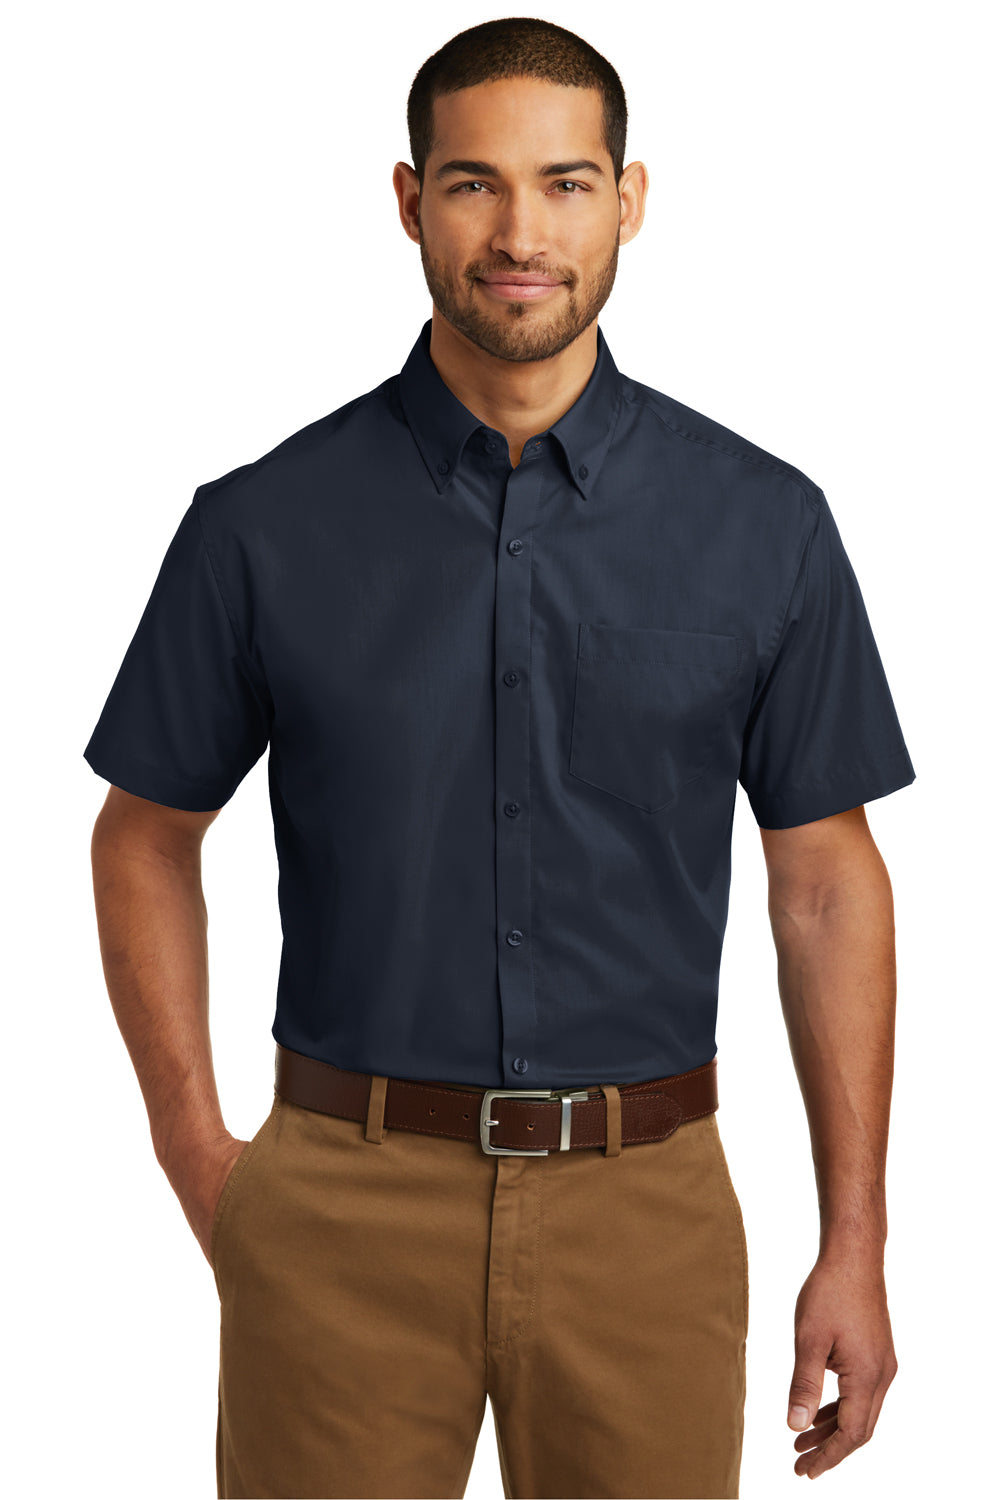 Port Authority W101 Mens Carefree Stain Resistant Short Sleeve Button Down Shirt w/ Pocket Navy Blue Front